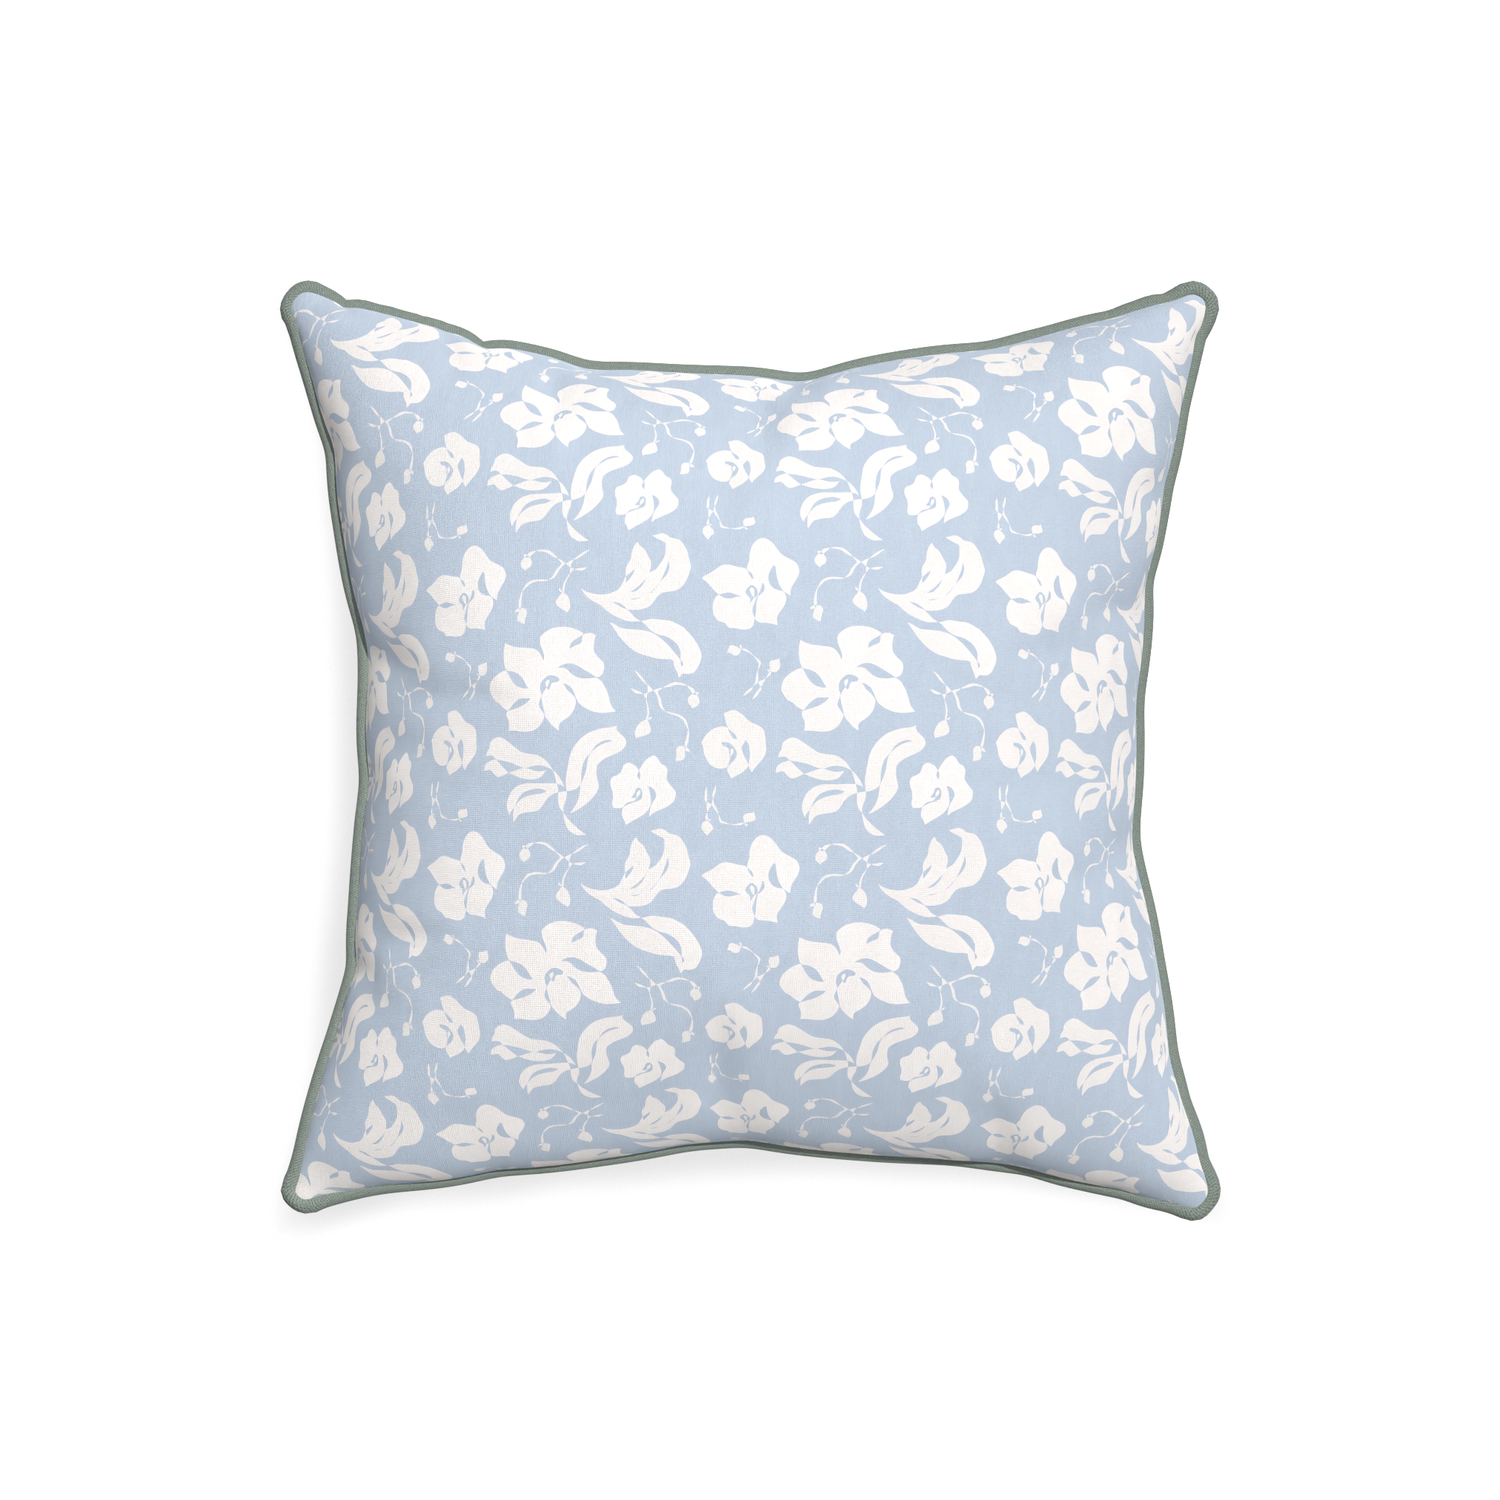 20-square georgia custom cornflower blue floralpillow with sage piping on white background